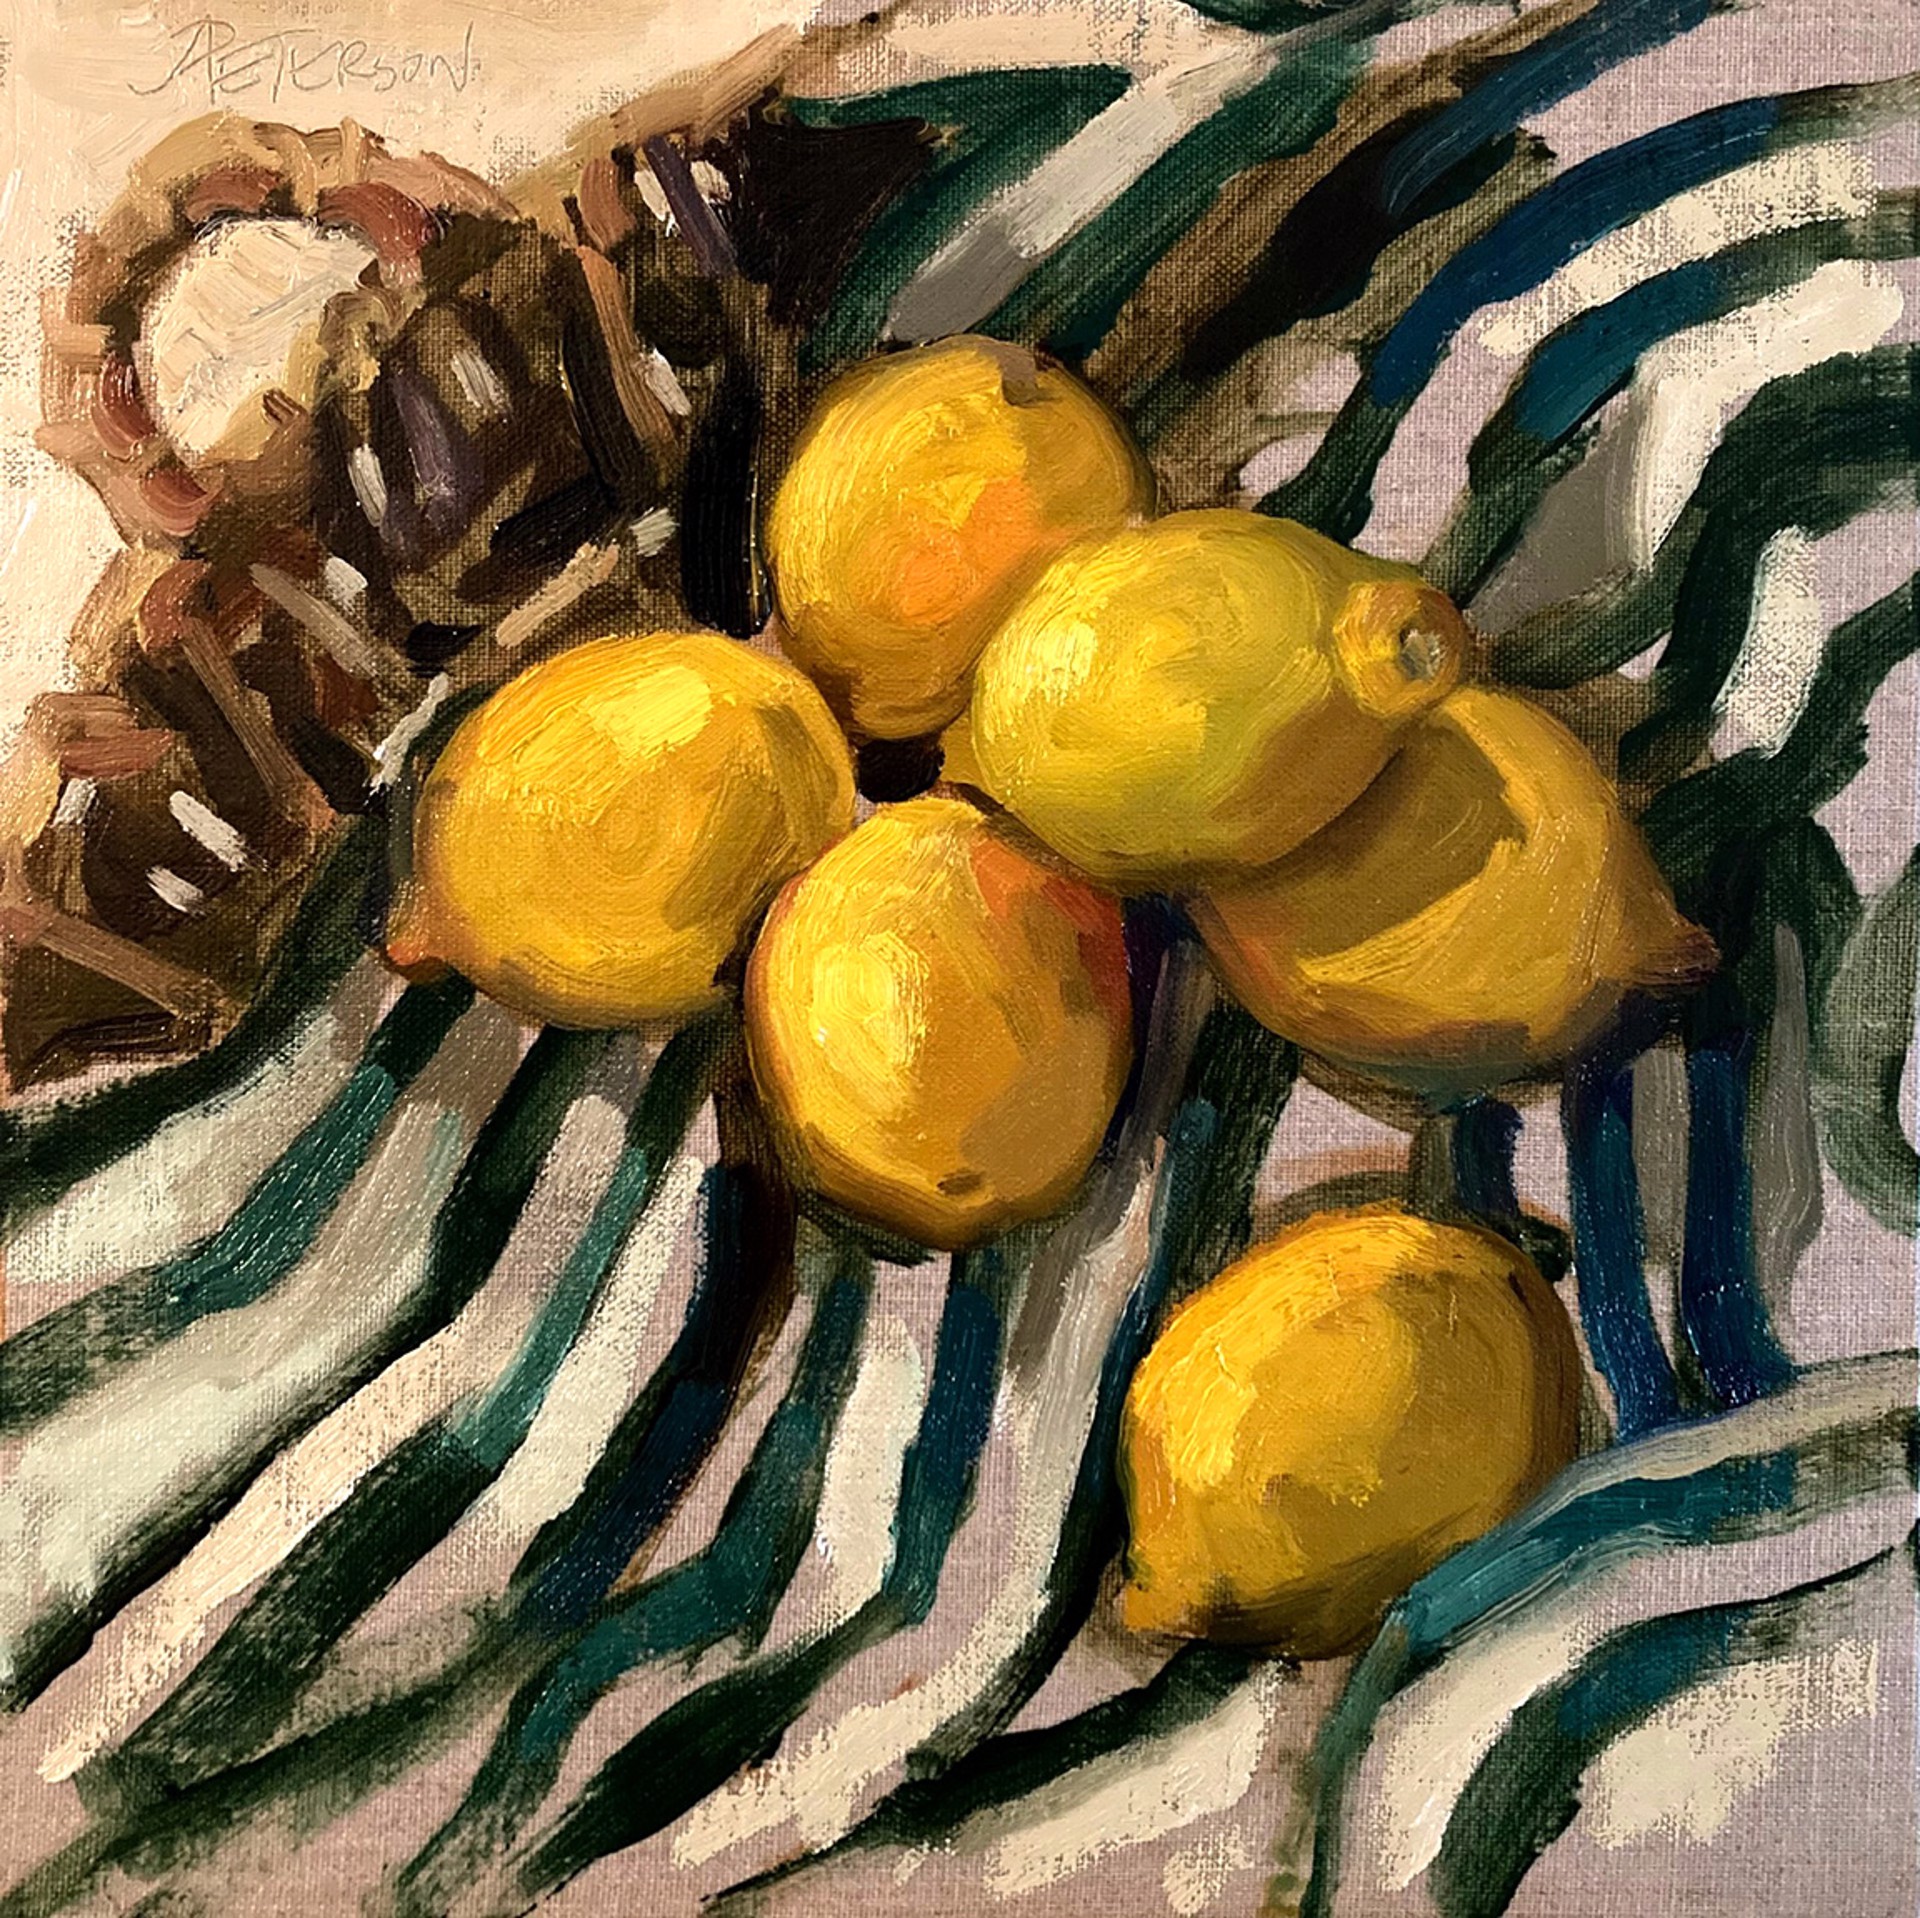 Lemons in Basket with Stripes by Amy R. Peterson